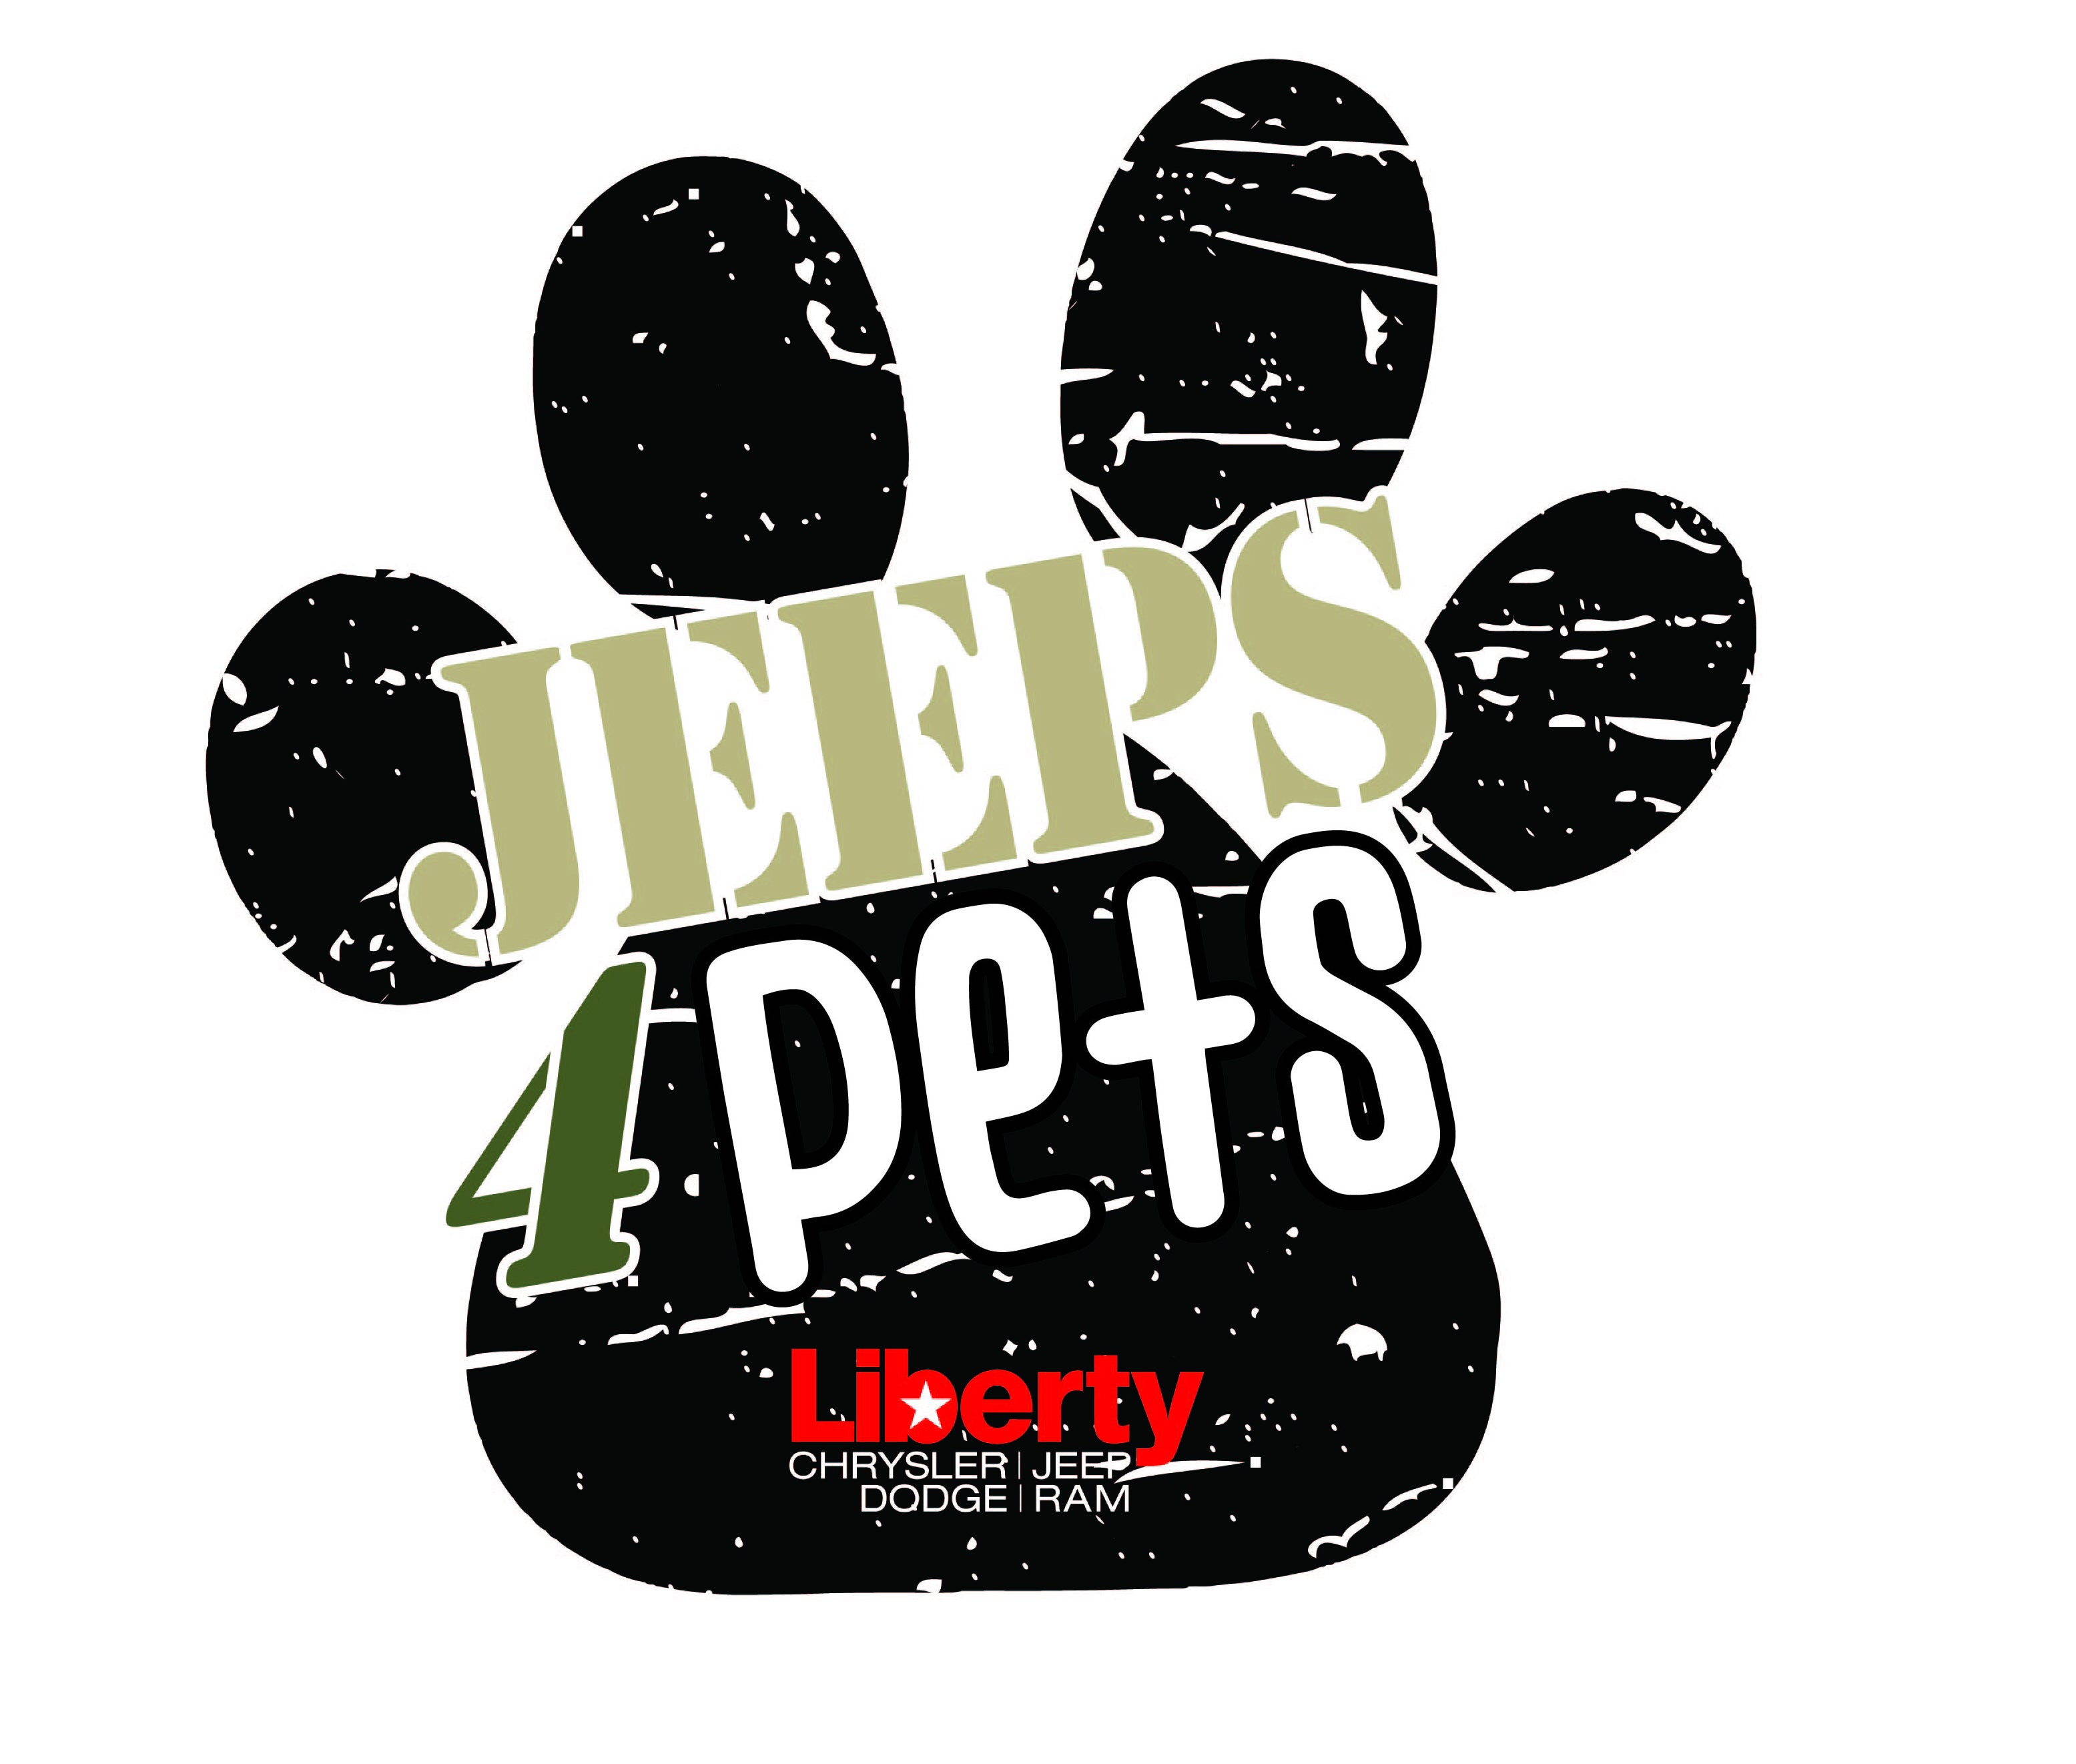 Jeeps 4 Vets